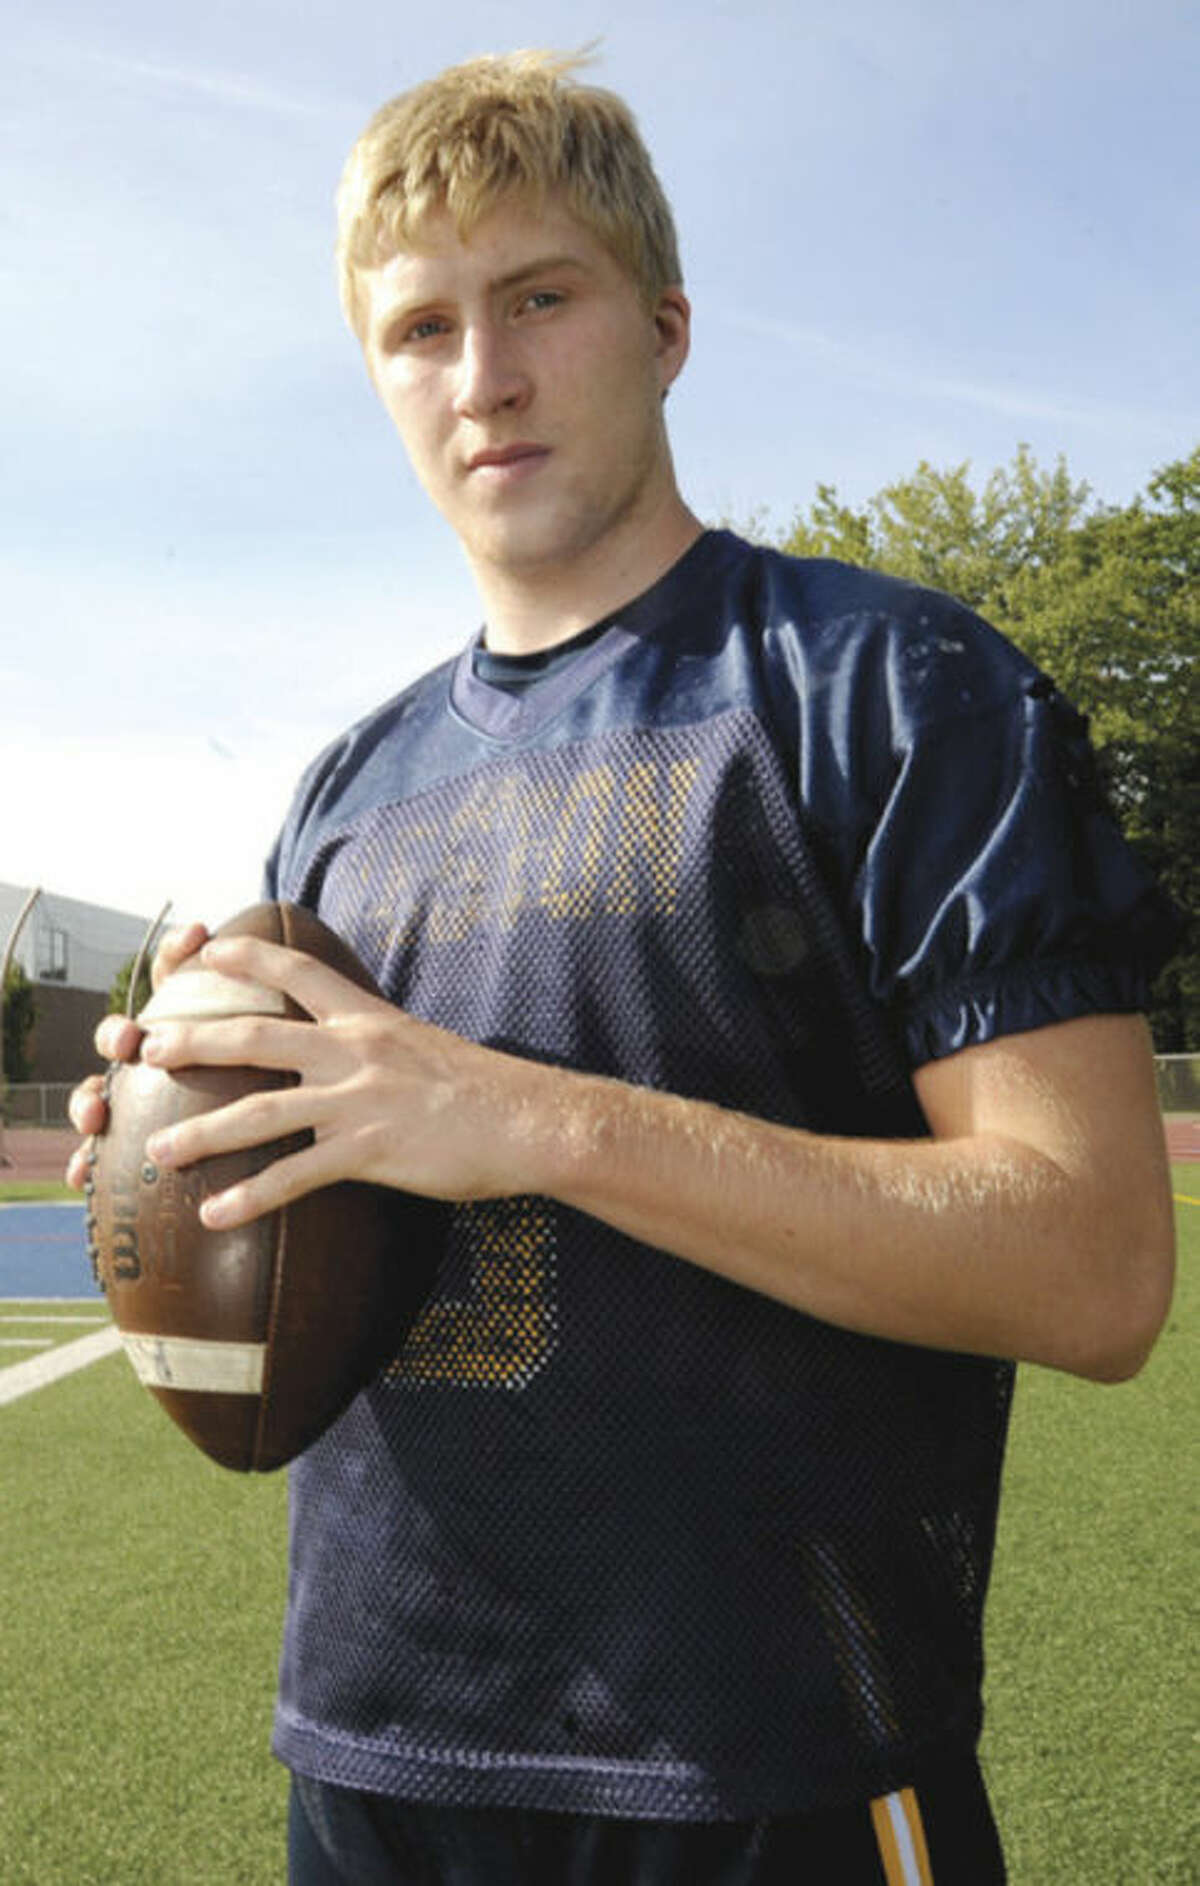 Hour photo/Matthew Vinci Erik Dammen-Brower takes over the quarterback duties at Weston High School, replacing one of the Trojans' best-ever signal callers in the process.